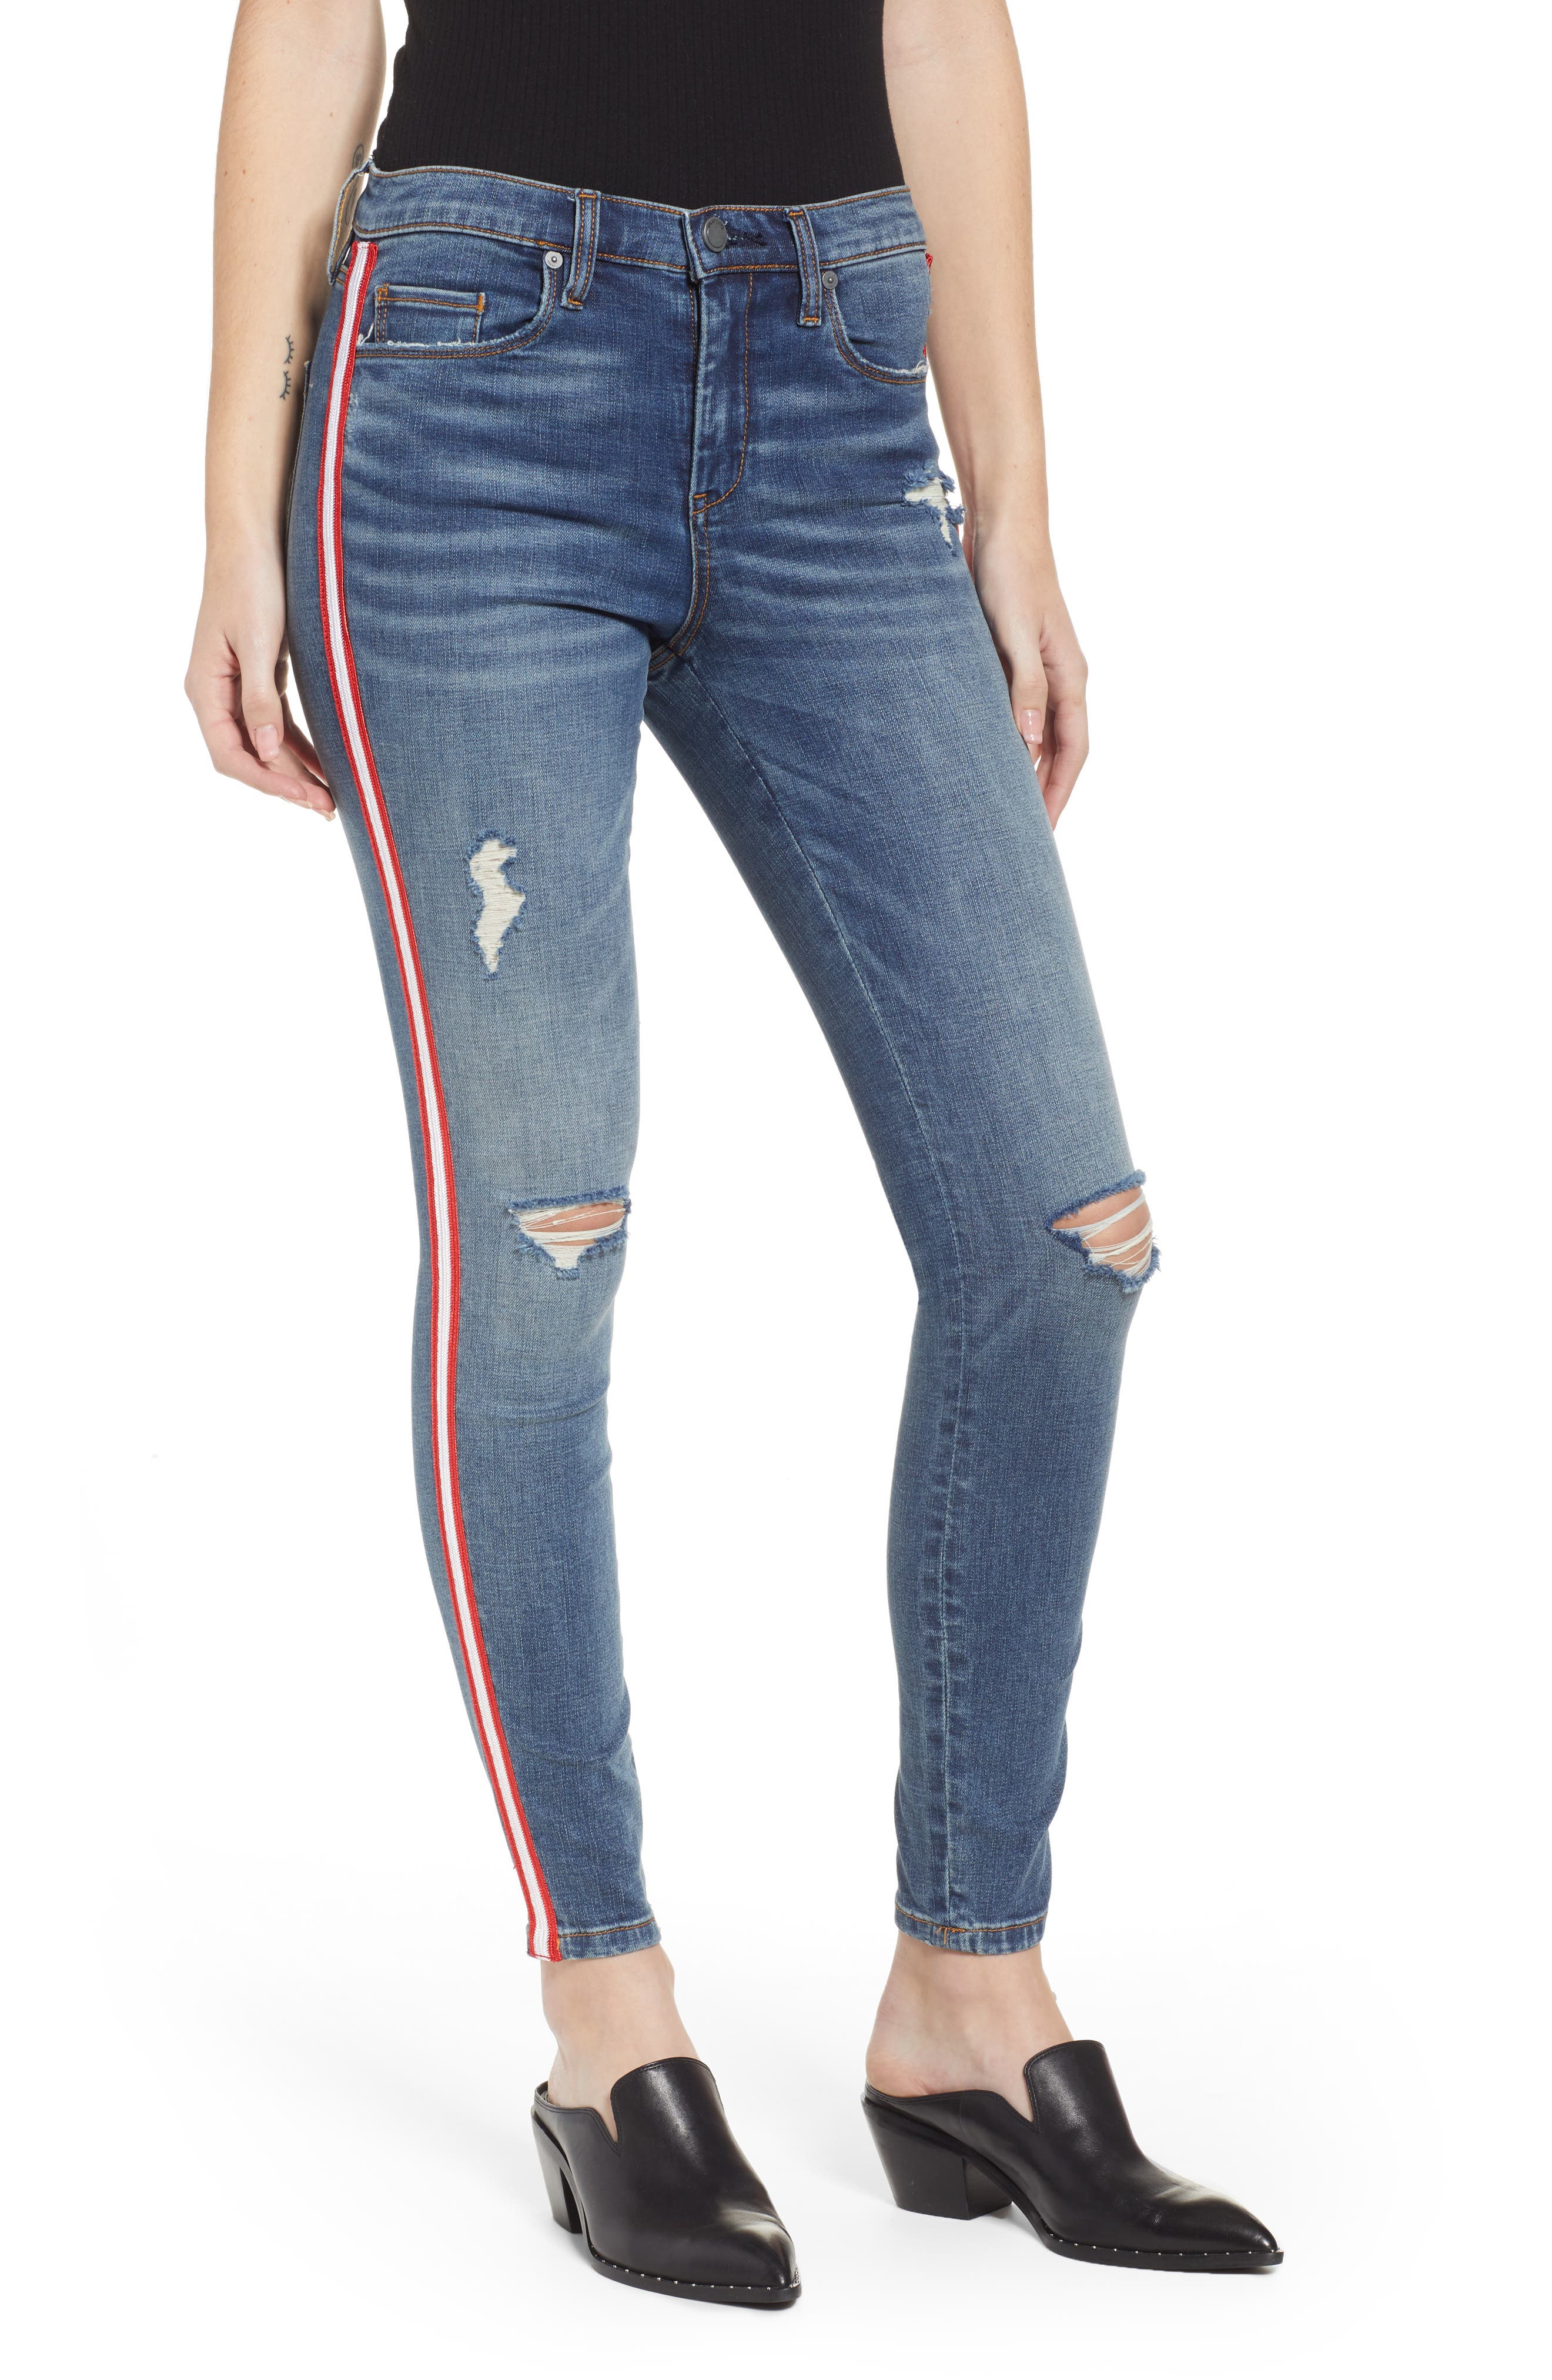 jeans with stripe down the side